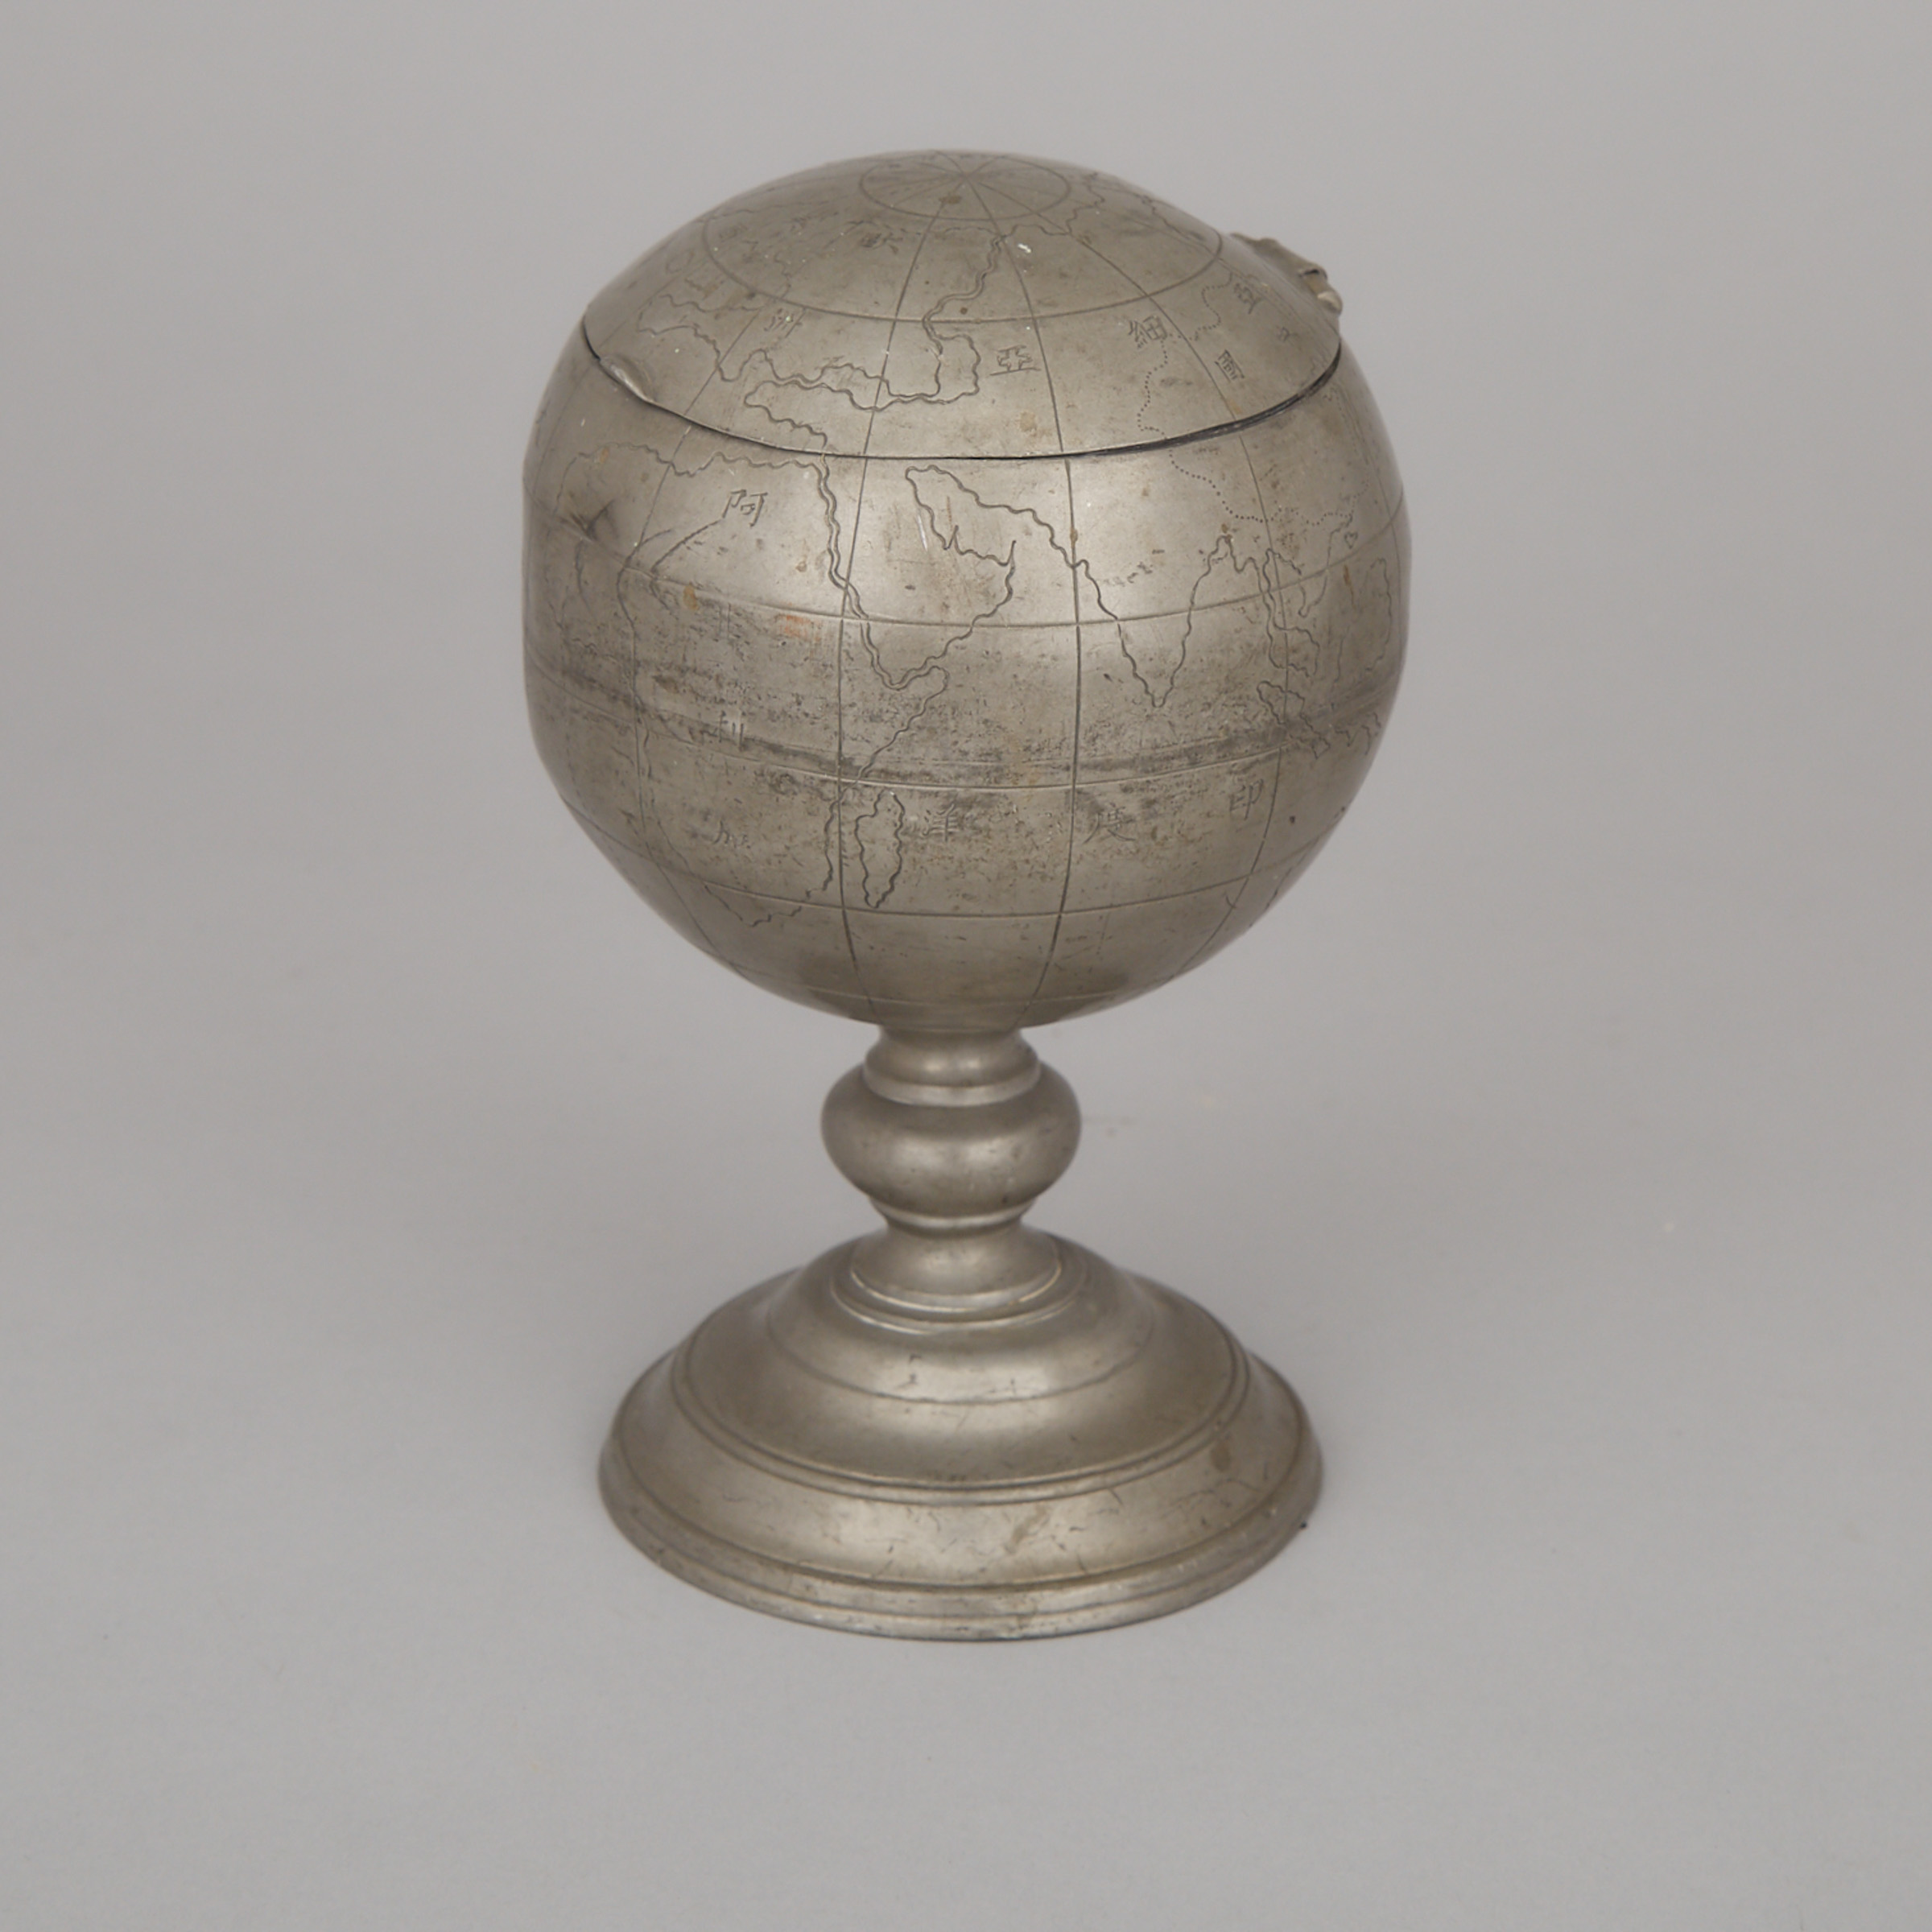 Chinese Pewter Terrestrial Globe Form Tobacco Canister, early 20th century